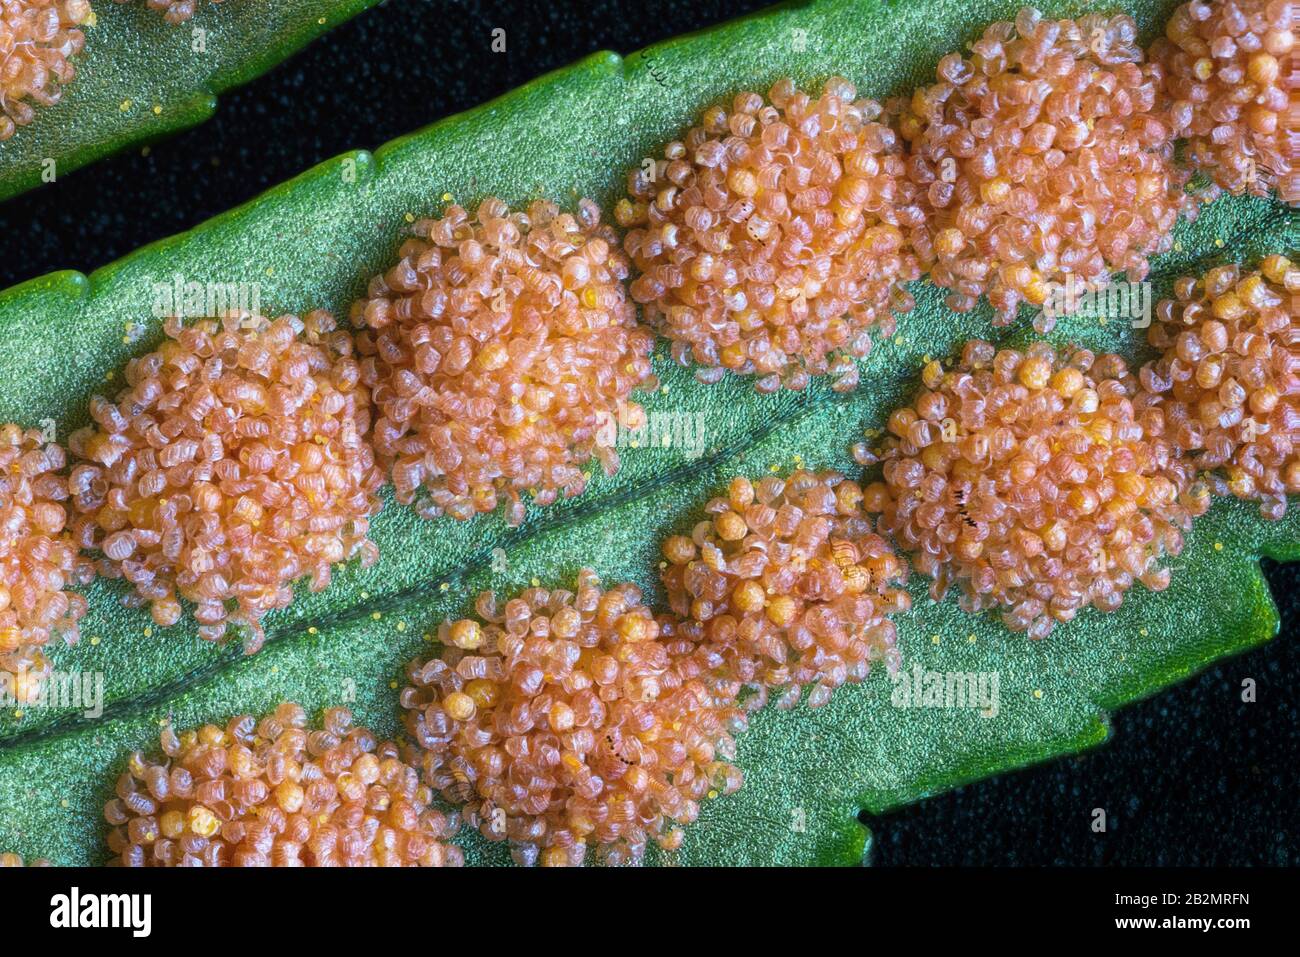 Clusters of sporangia or sori on the underside of leaves of common polypody fern Polypodium vulgare in winter when largely empty of yellow spores Stock Photo